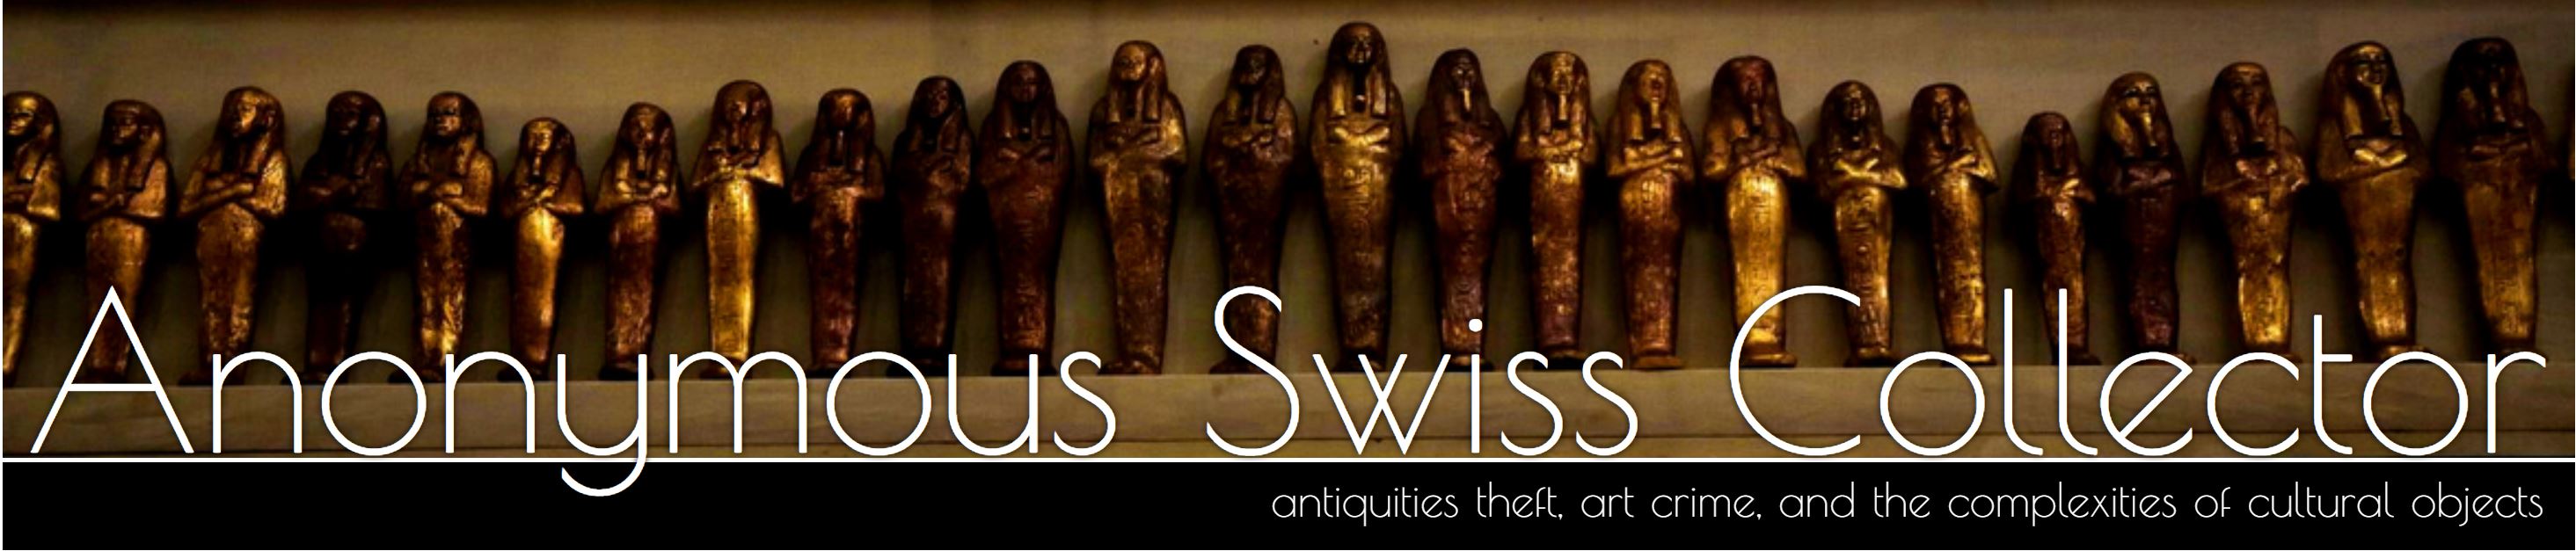 header from anonymous swiss collector